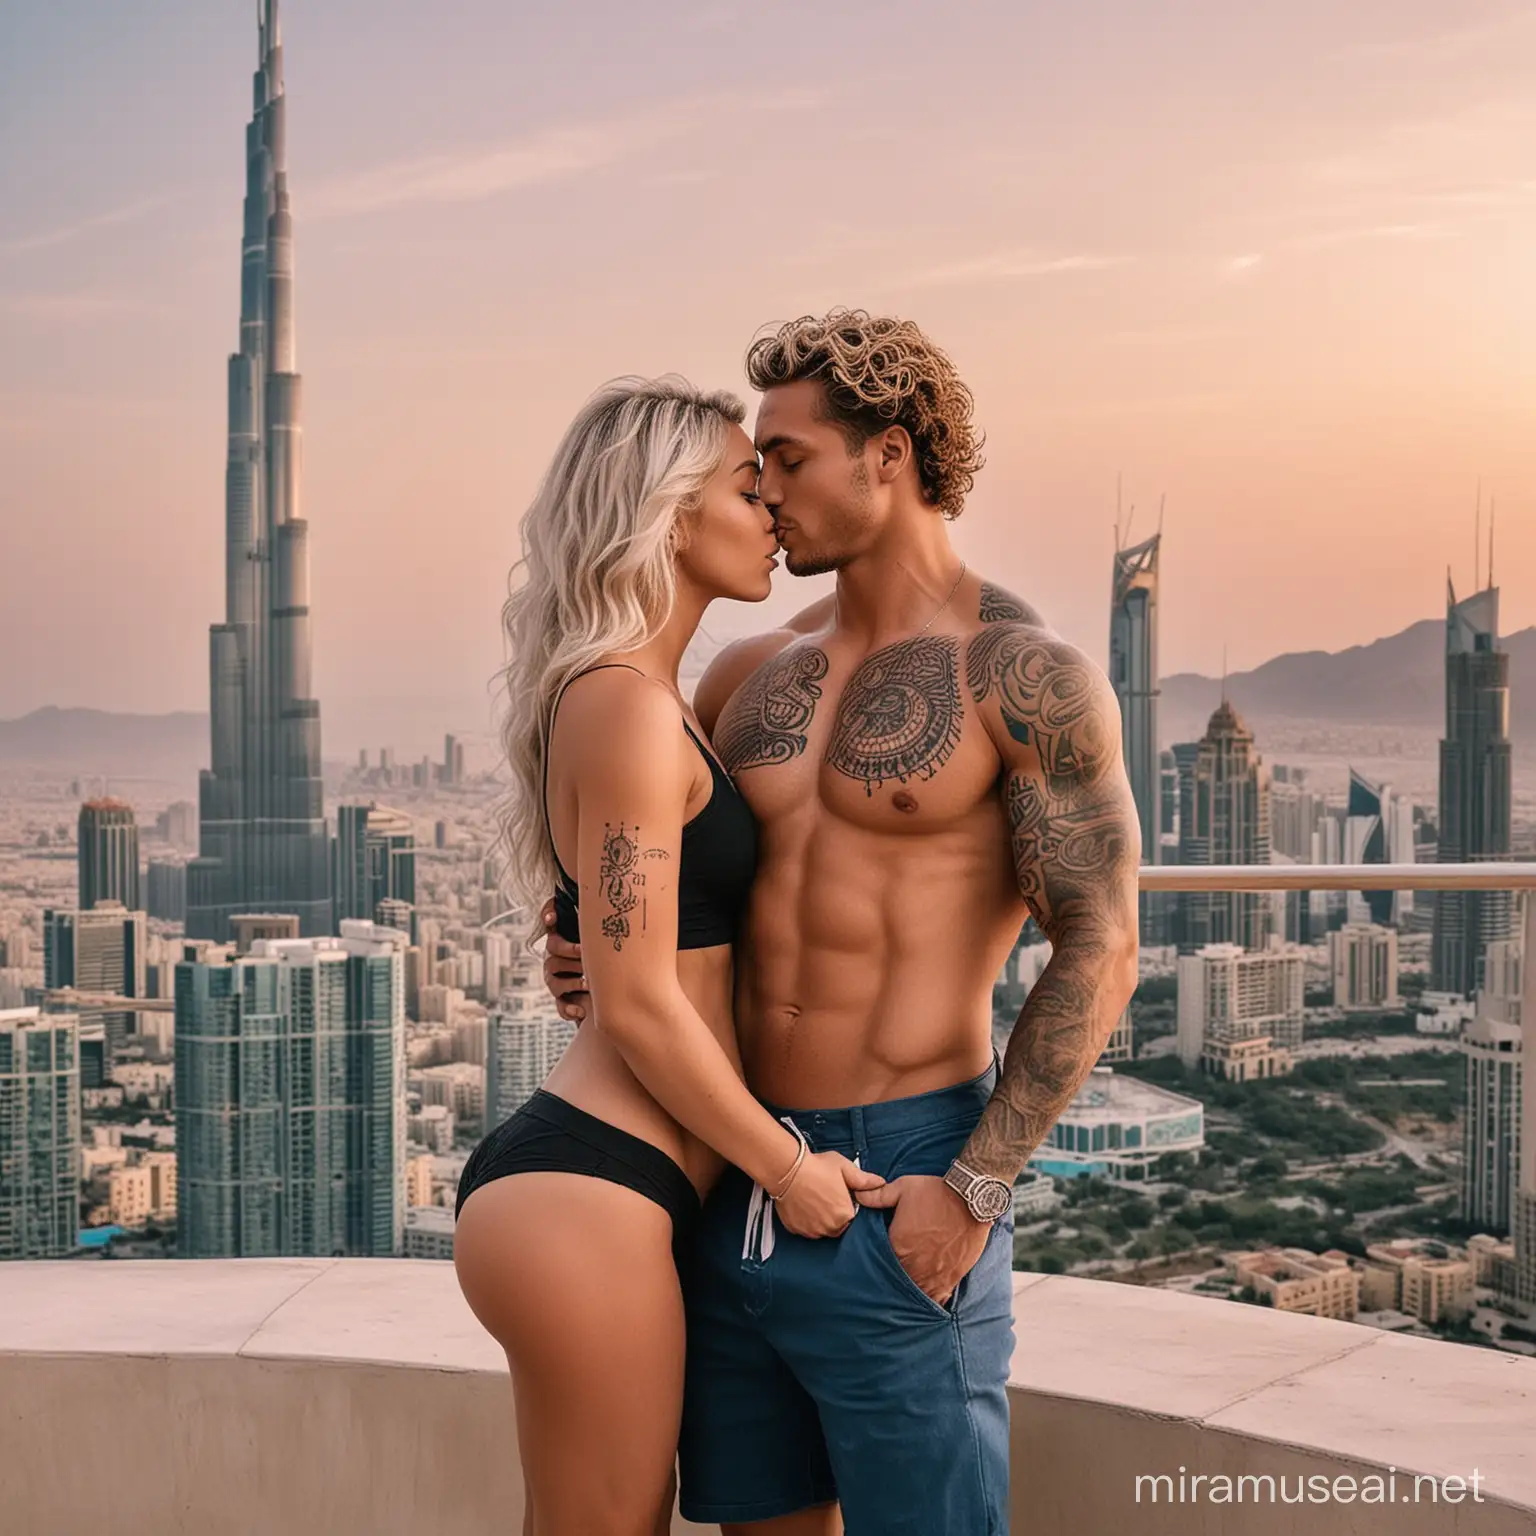 generate a picture of a muscular man who is a football player, has a checkered stomach and a big penis, has light brown short curly hair and blue color, he has tattoos on his arms. This man has a beautiful wife who is pregnant, the woman is blonde and pink, her hair is blue, they are very rich, the woman is the daughter of a king 👑, and the man is a talented soccer player. in the background a large skyscraper is visible from their luxurious 7-story high villa. The woman should be pregnant and show it the man's cute wife is also with him ♥️♥️the woman and the man are kissing , their luxury villa is on the side of the mountain is very high Beside the mountain there should be a beautiful sea with a sandy beach ,the skyscraper should be similar to Burj Khalifa in Dubai